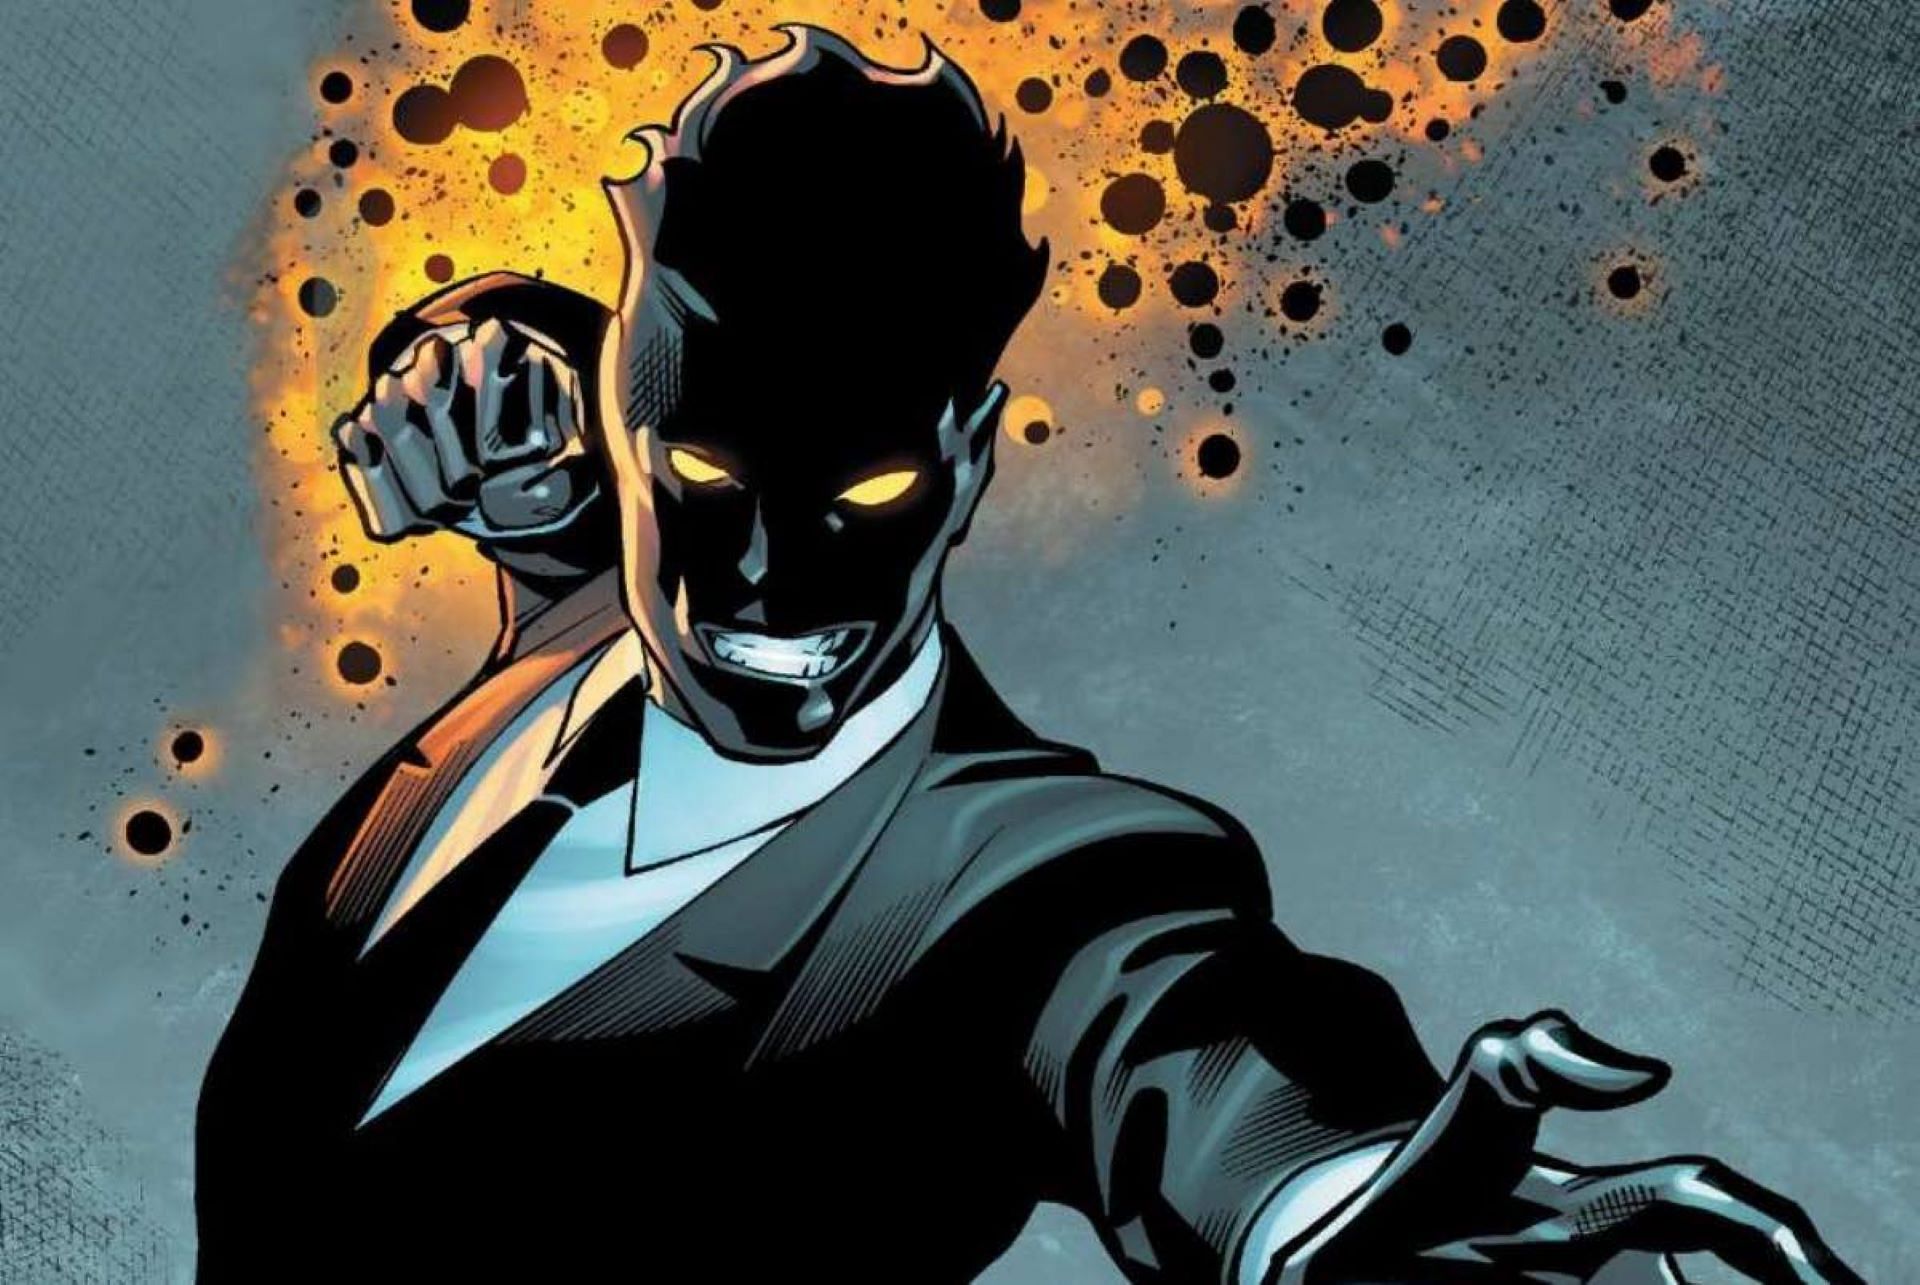 Sunspot is one of the influential members of Young Mutants (Image via Marvel)